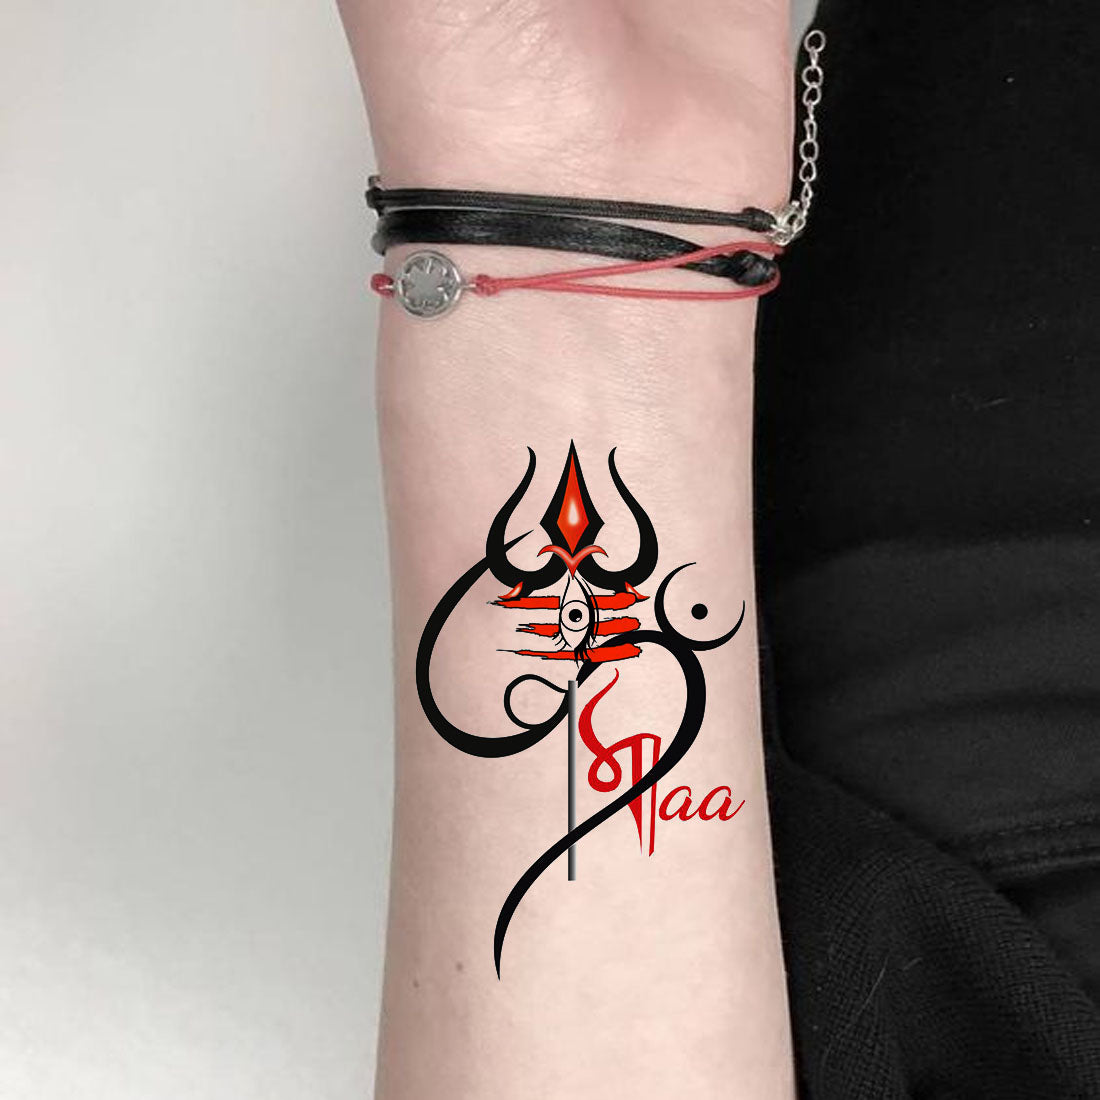 komstec Lord Shiva Tattoo Temporary Tattoo Stickers For Male And Female  Fake Tattoo - Price in India, Buy komstec Lord Shiva Tattoo Temporary Tattoo  Stickers For Male And Female Fake Tattoo Online